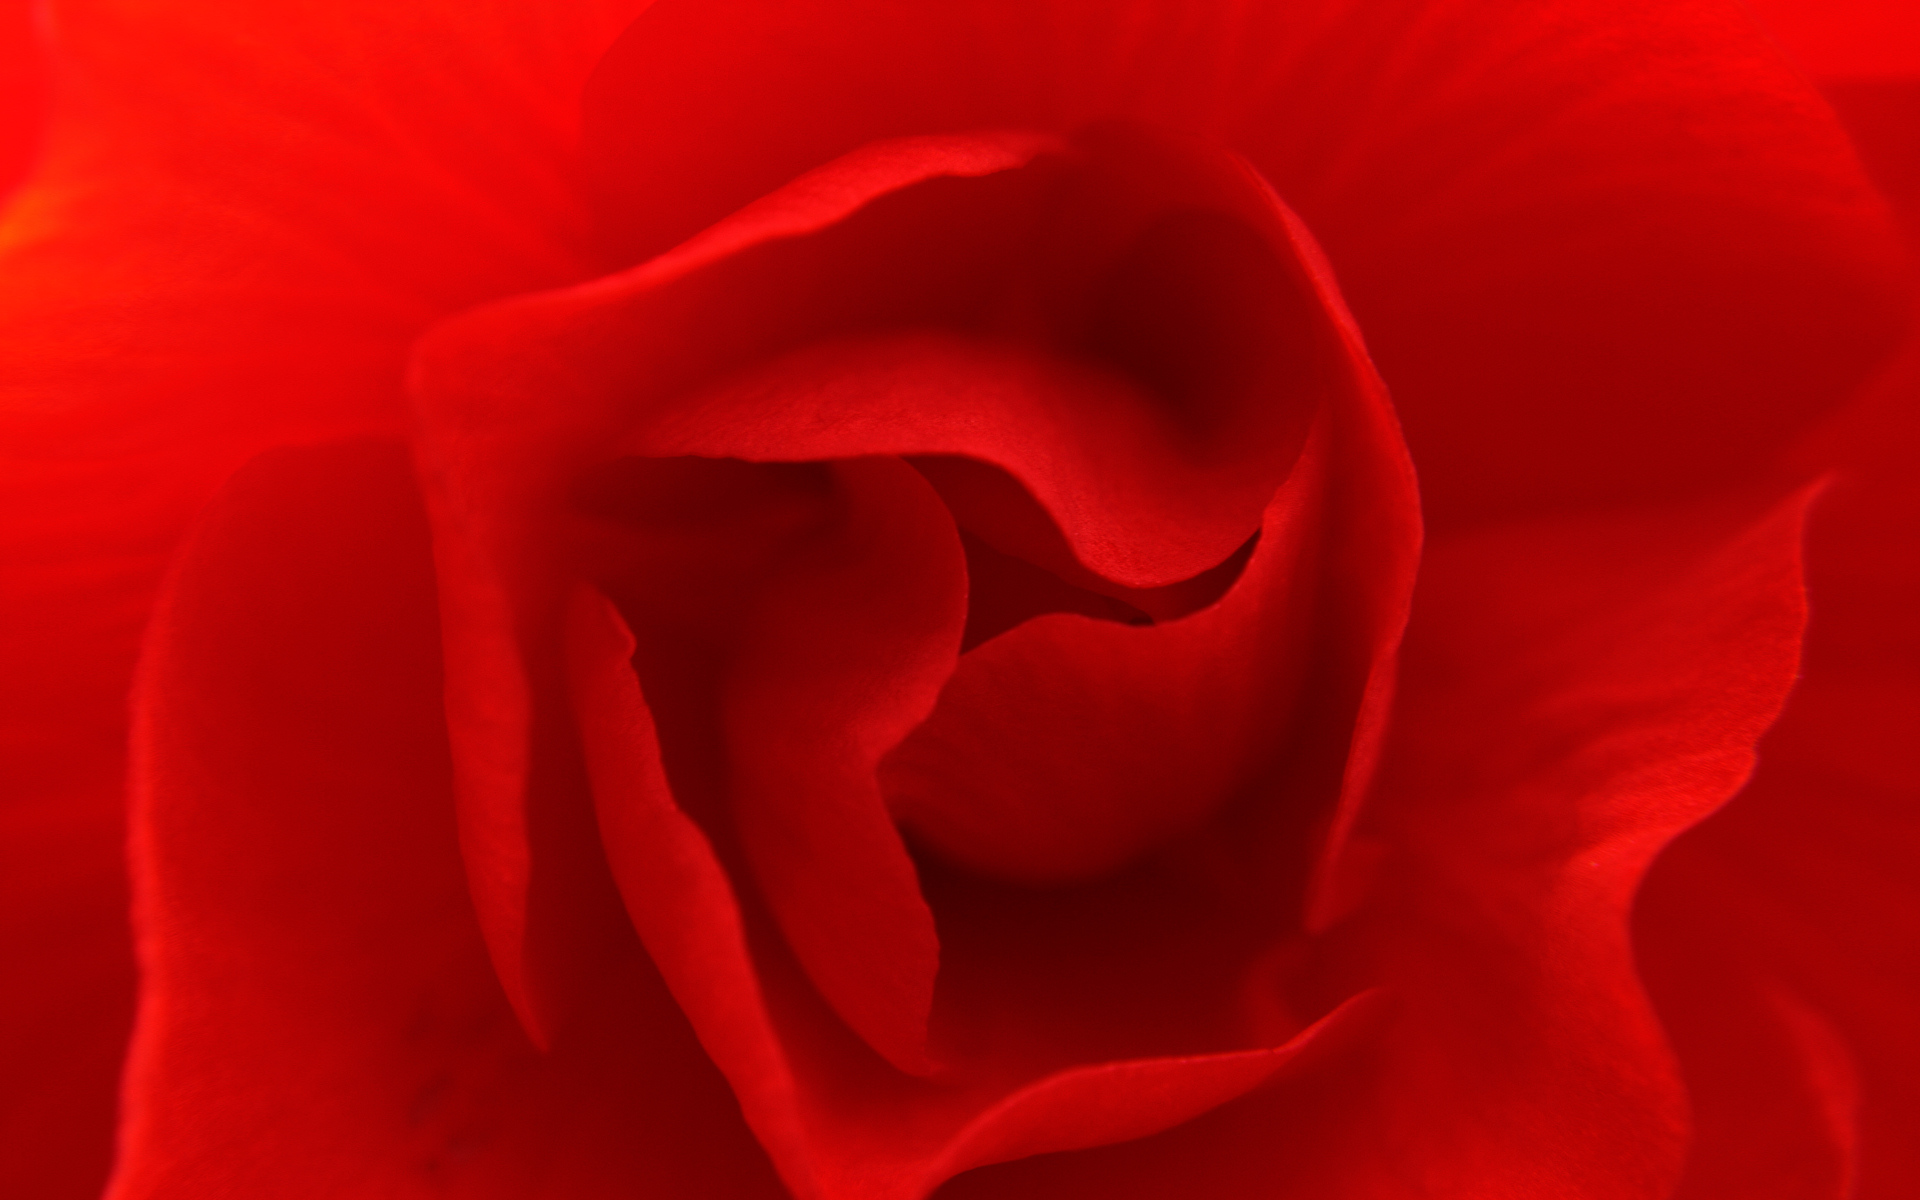 Wallpaper Red Rose Gallery Beautiful Anachronist84